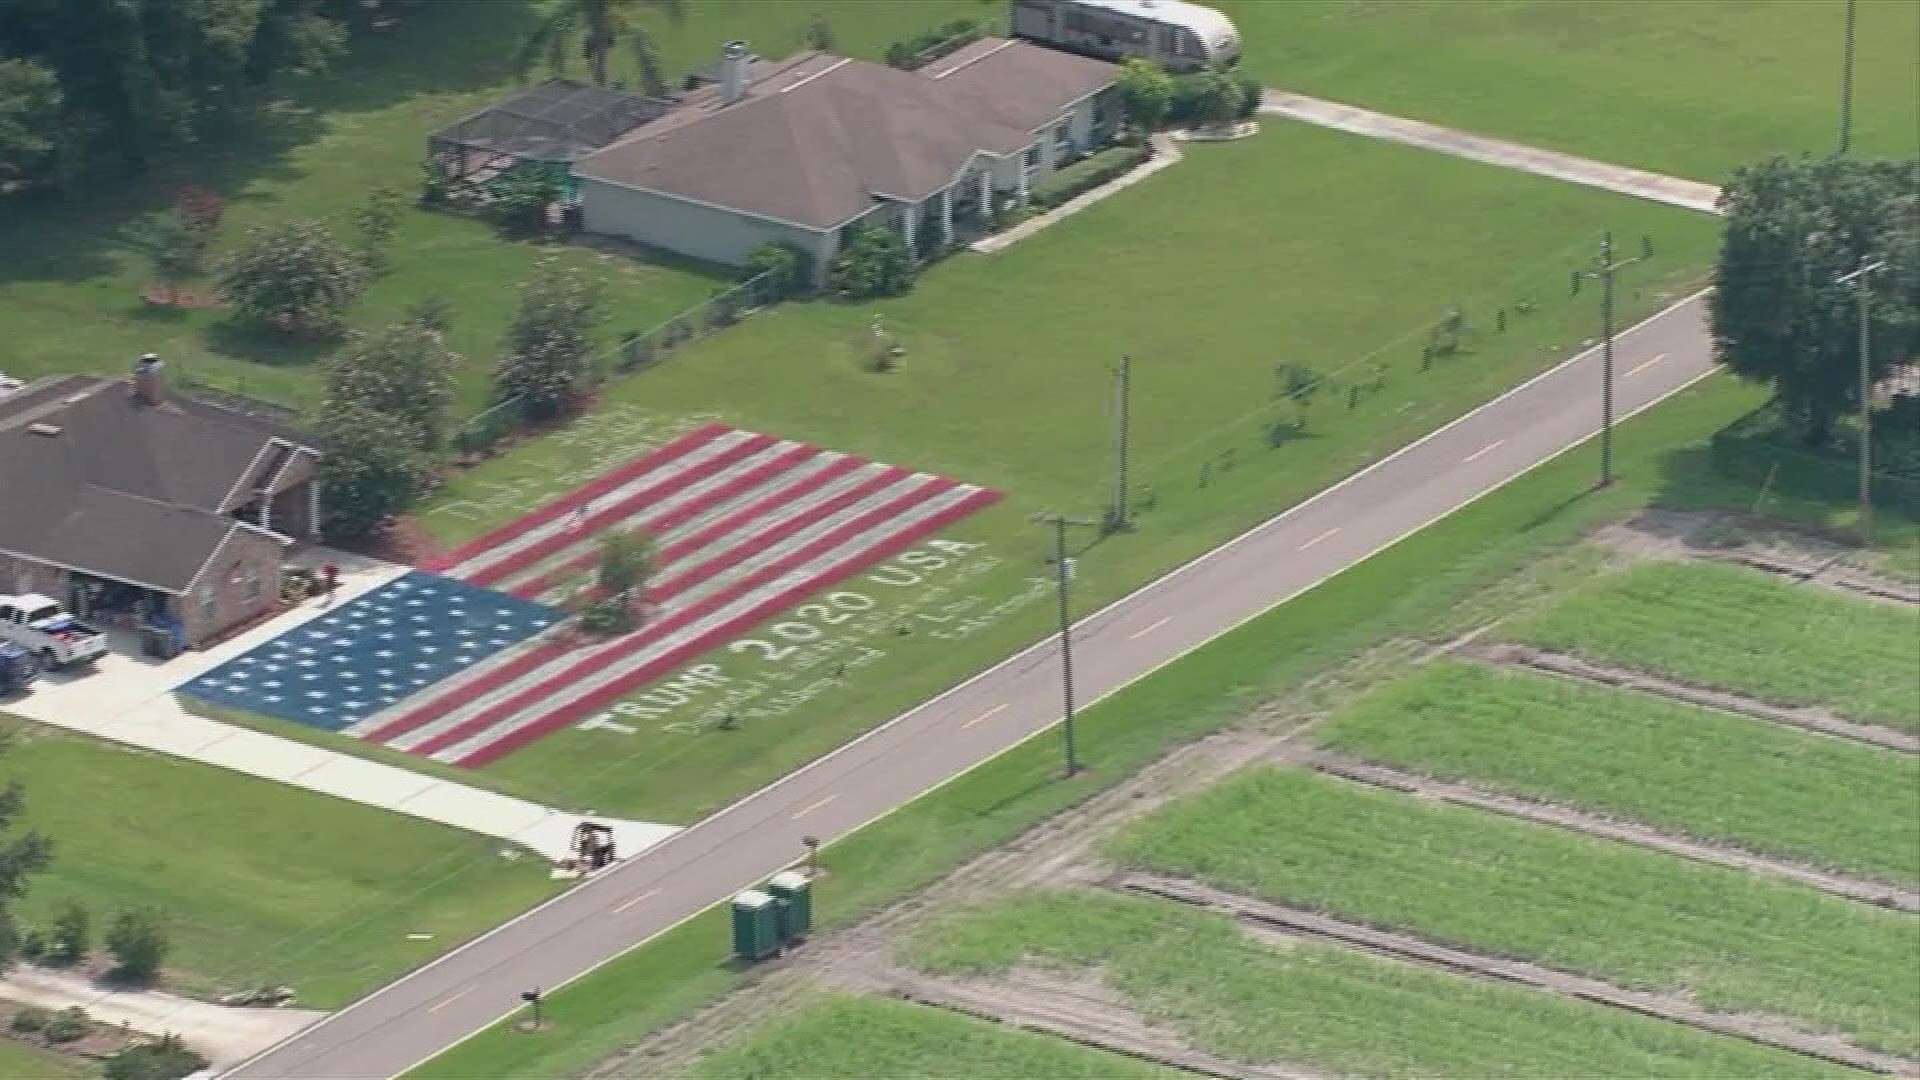 Sky 10 got aerial footage of the massive flag painted on the lawn outside of a Plant City home. https://on.wtsp.com/305Ibmy